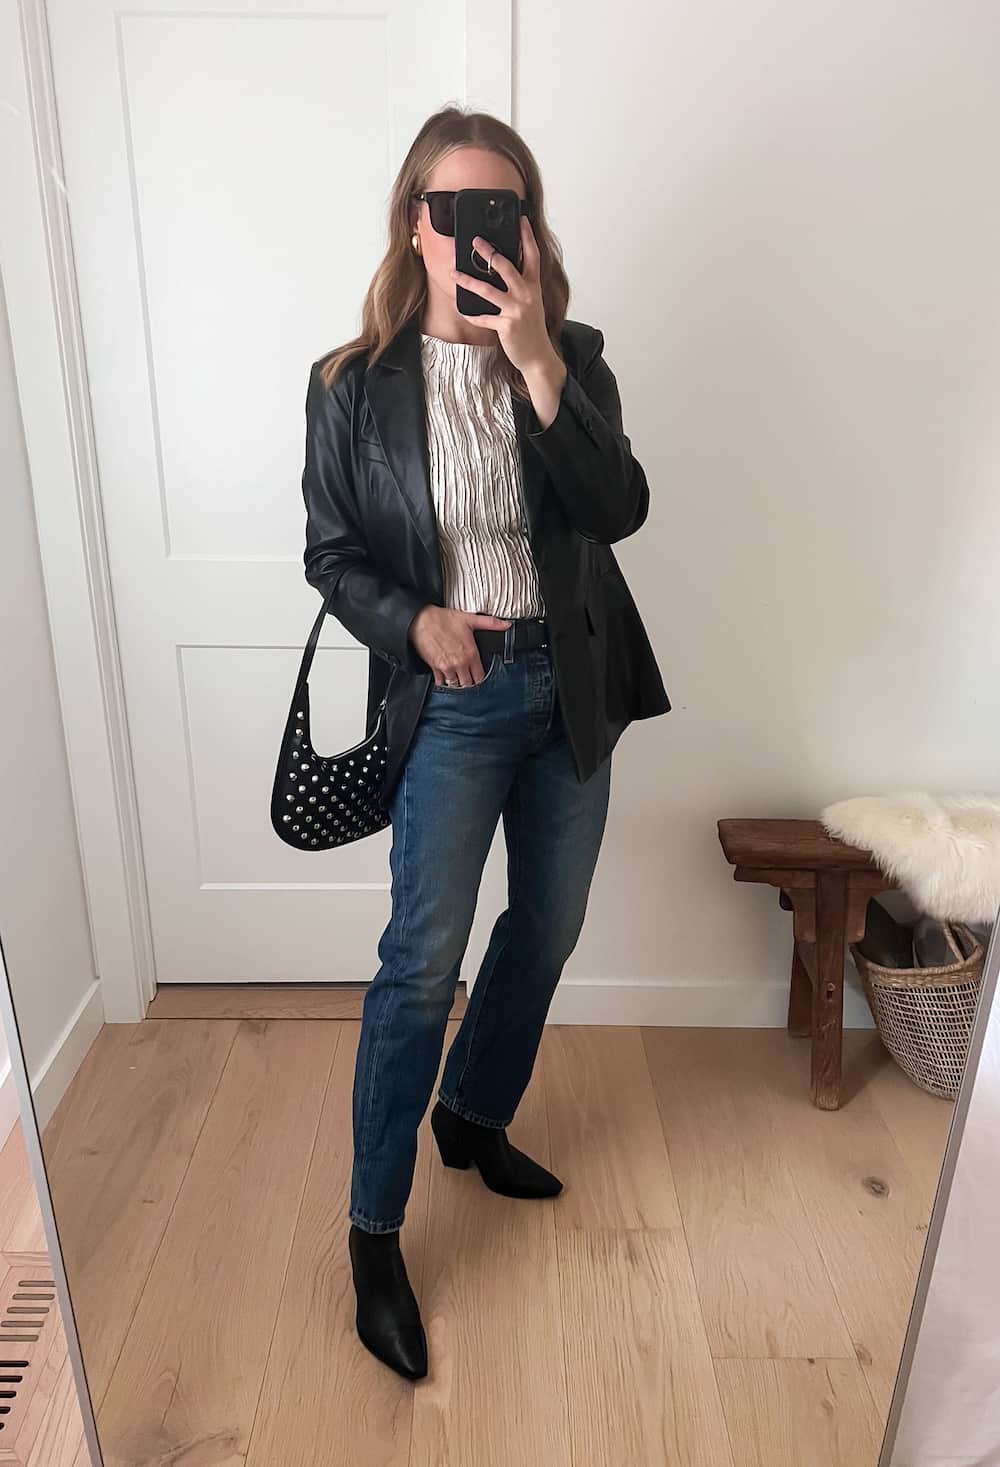 Christal wearing jeans with black booties, a silver top and a black leather blazer.